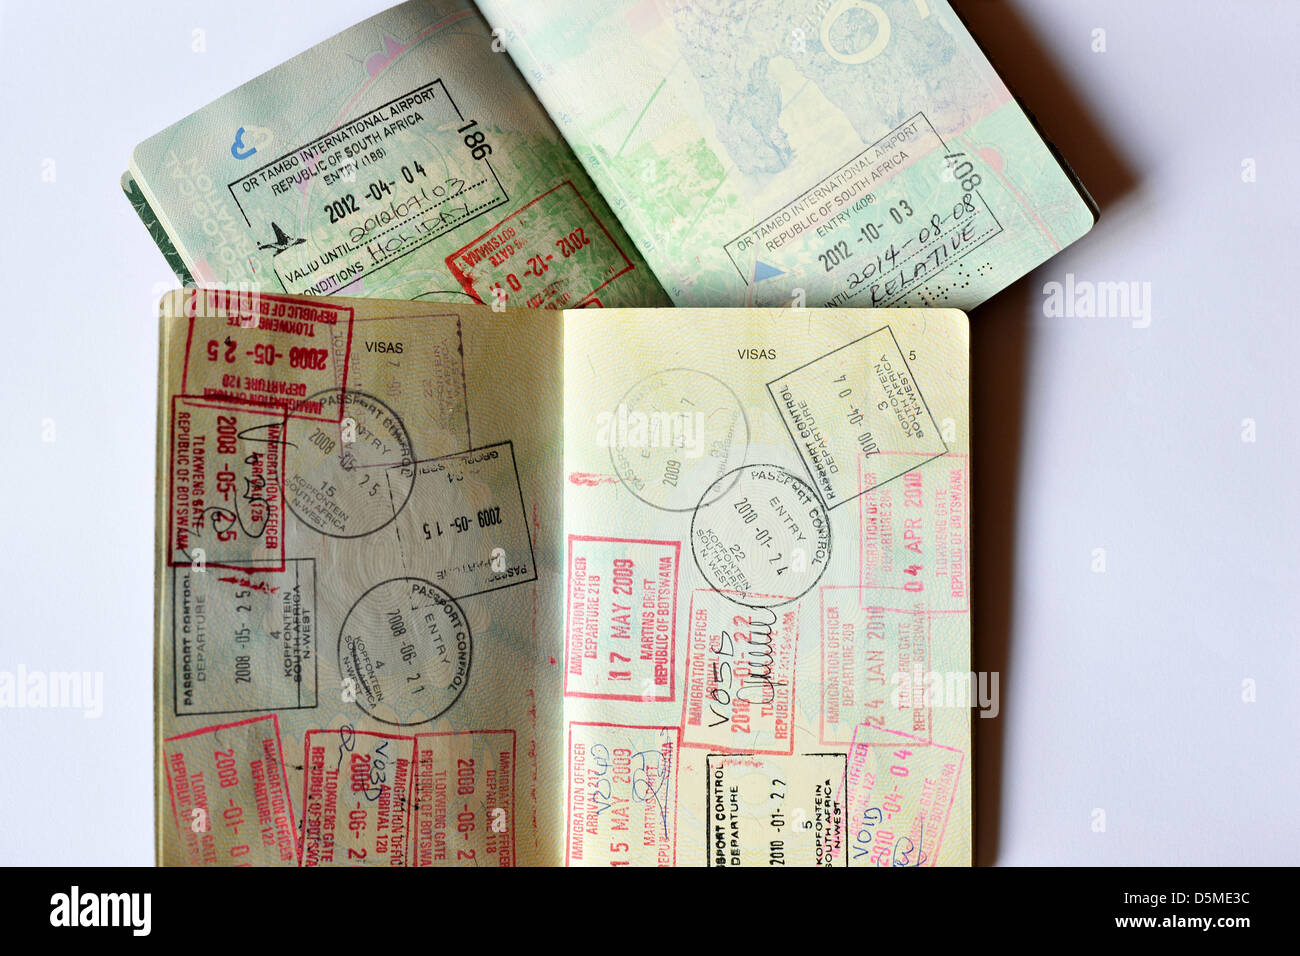 Two Passports with fully used Visa pages stamped full of Visas. Stock Photo